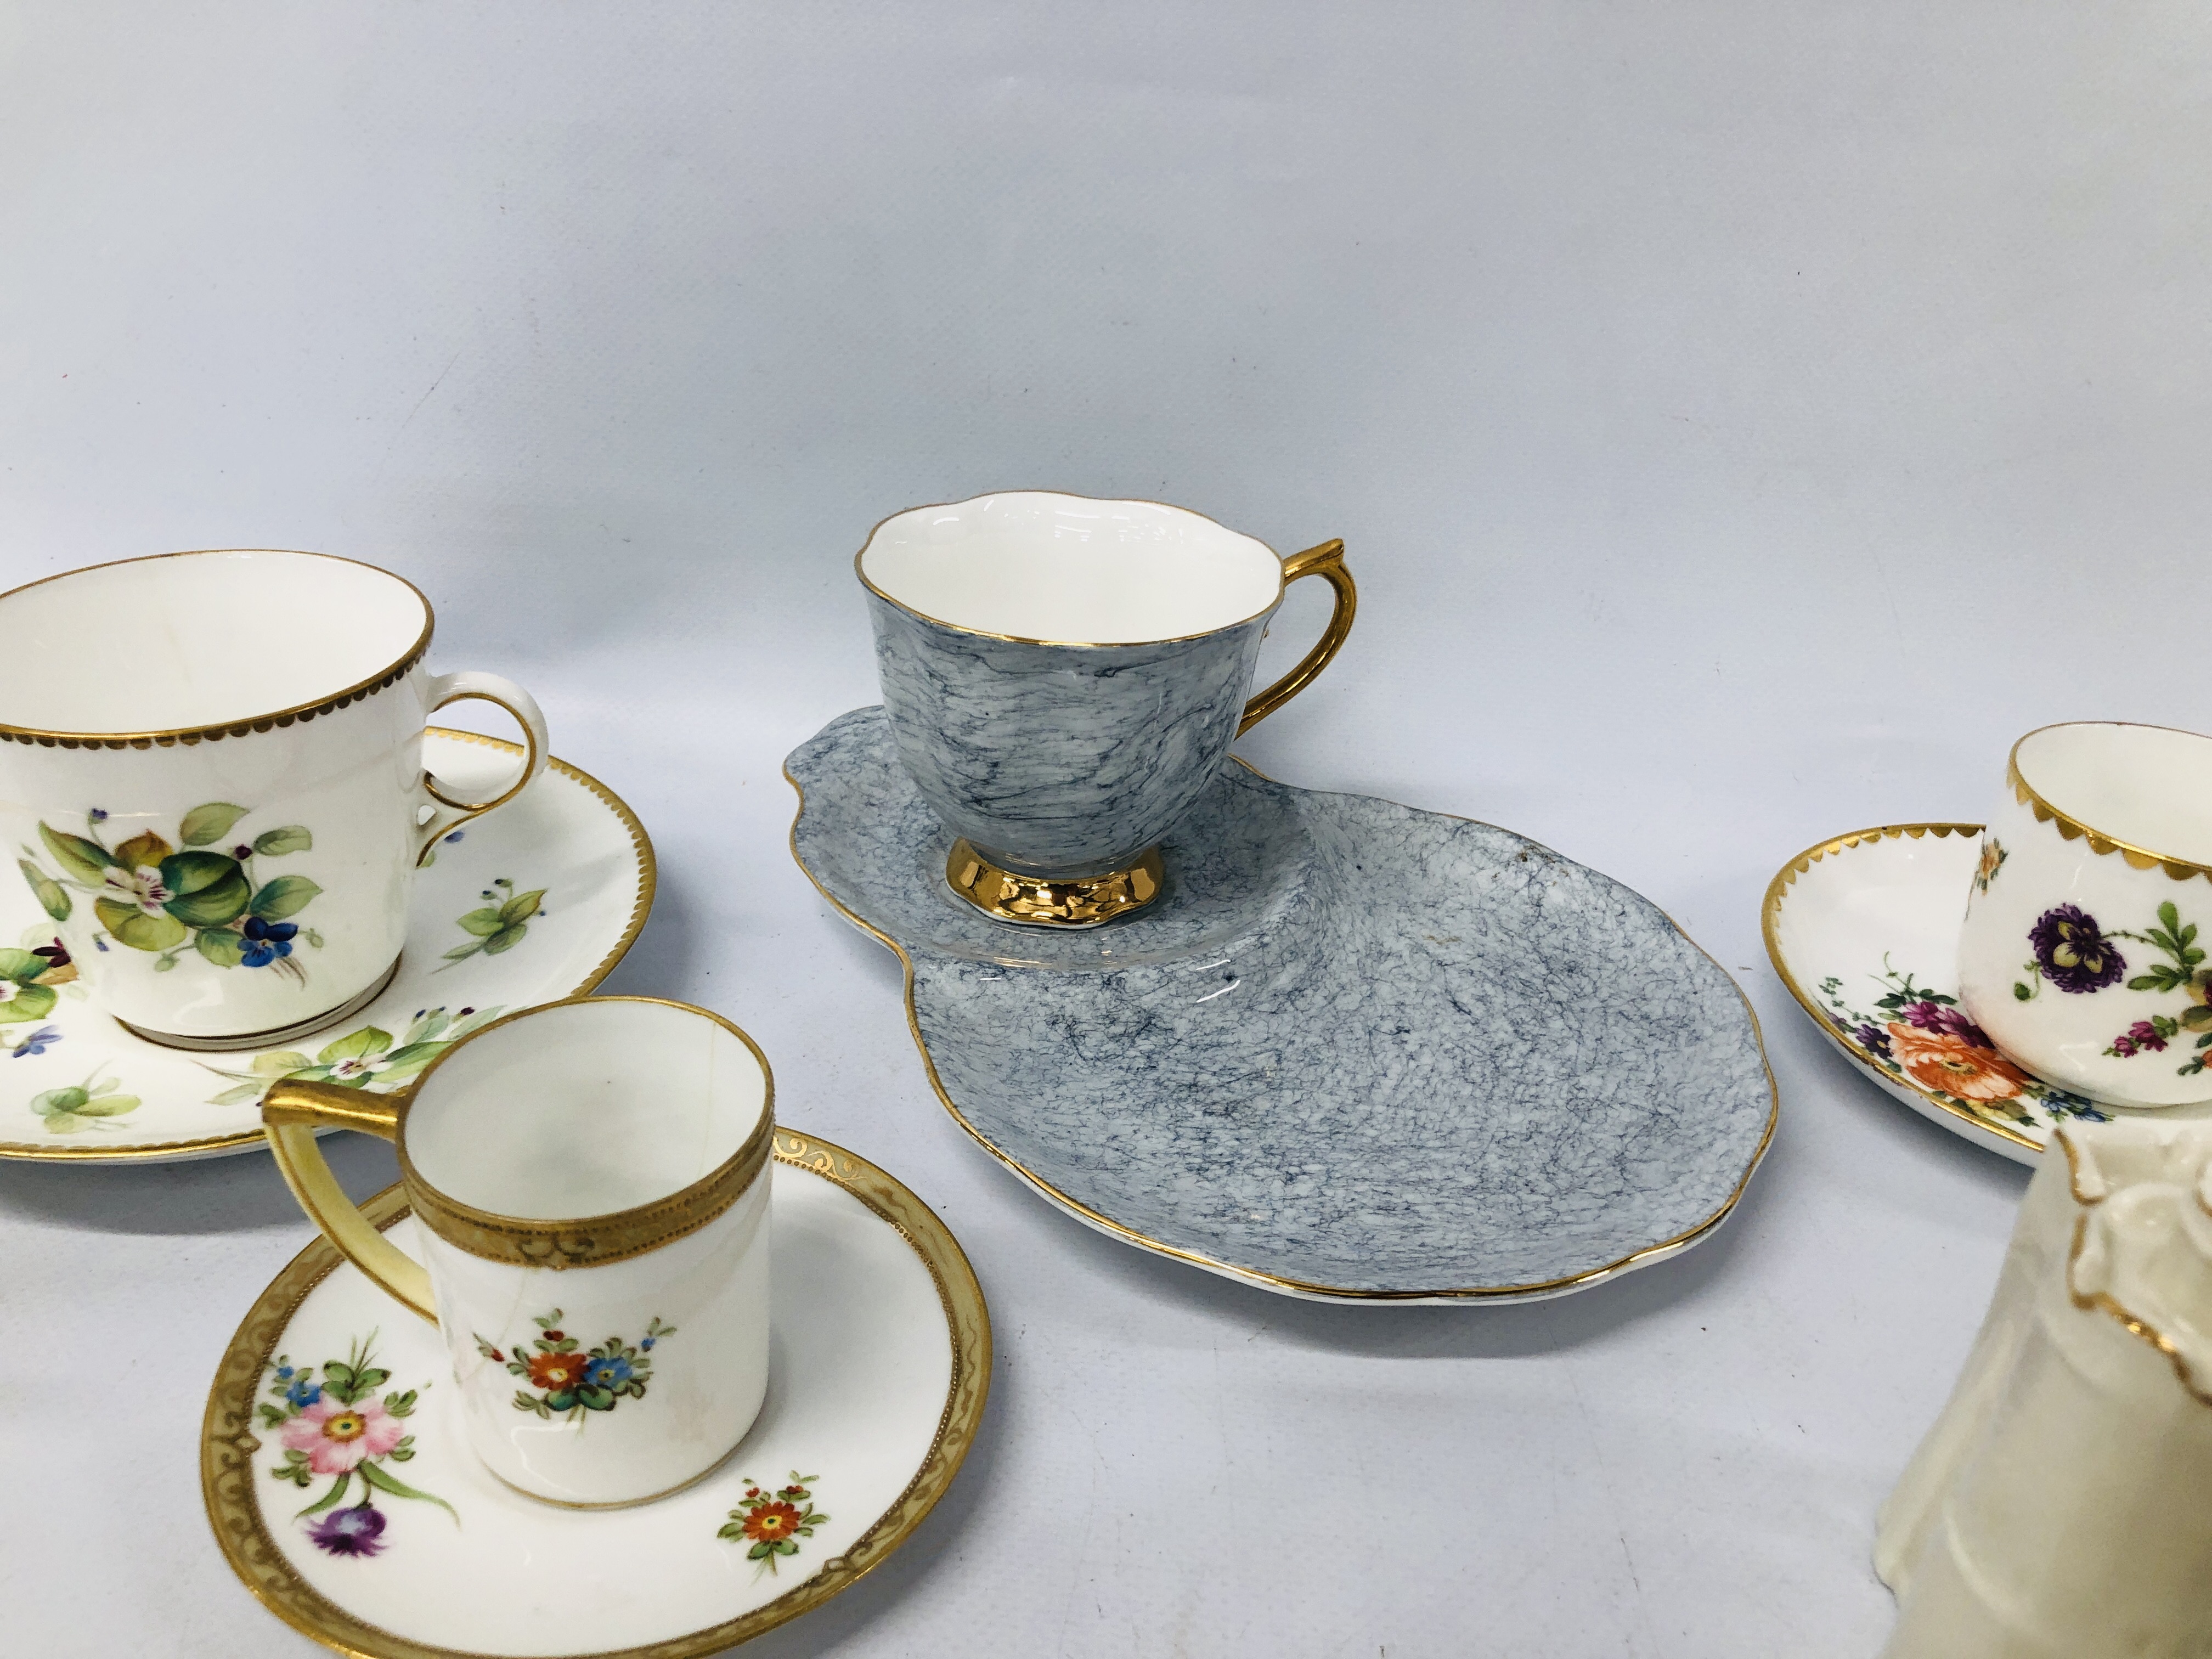 8 X VARIOUS CABINET CUPS AND SAUCERS TO INCLUDE ROYAL ALBERT "GOSSAMER" HAND PAINTED FLORAL DESIGN - Image 4 of 11